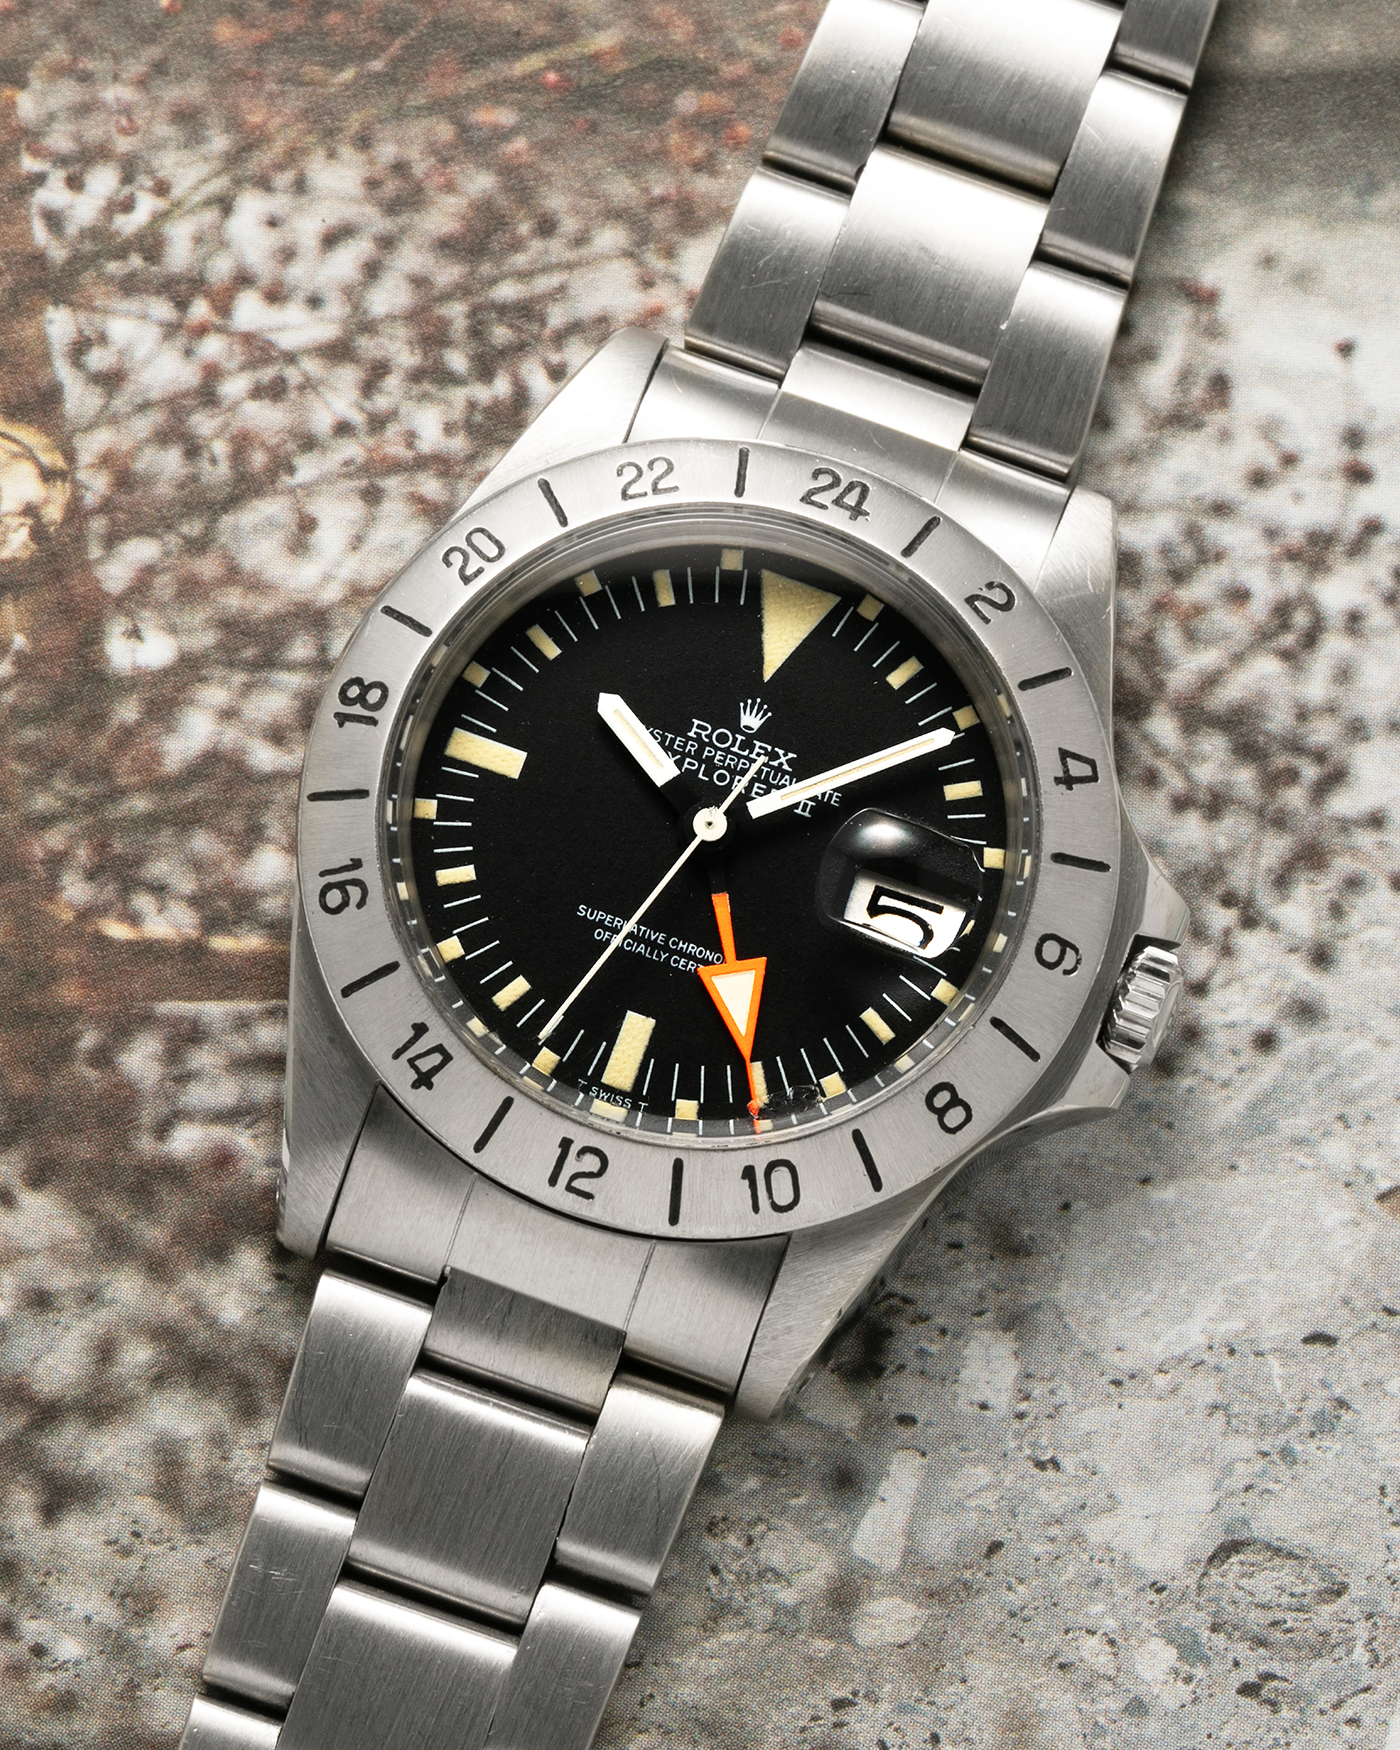 Brand: Rolex Year: 1972 Model: Explorer II ‘Straight Hand’ Reference Number: 1655 Serial Number: 318XXXX Material: Stainless Steel Movement: Rolex Cal. 1575, Self-Winding Case Diameter: 39mm Lug Width: 20mm Bracelet: Rolex VE Steelinox ‘78360’ Oyster Bracelet with ‘580’ Curved End Links, additional Rolex C&I Riveted Bracelet